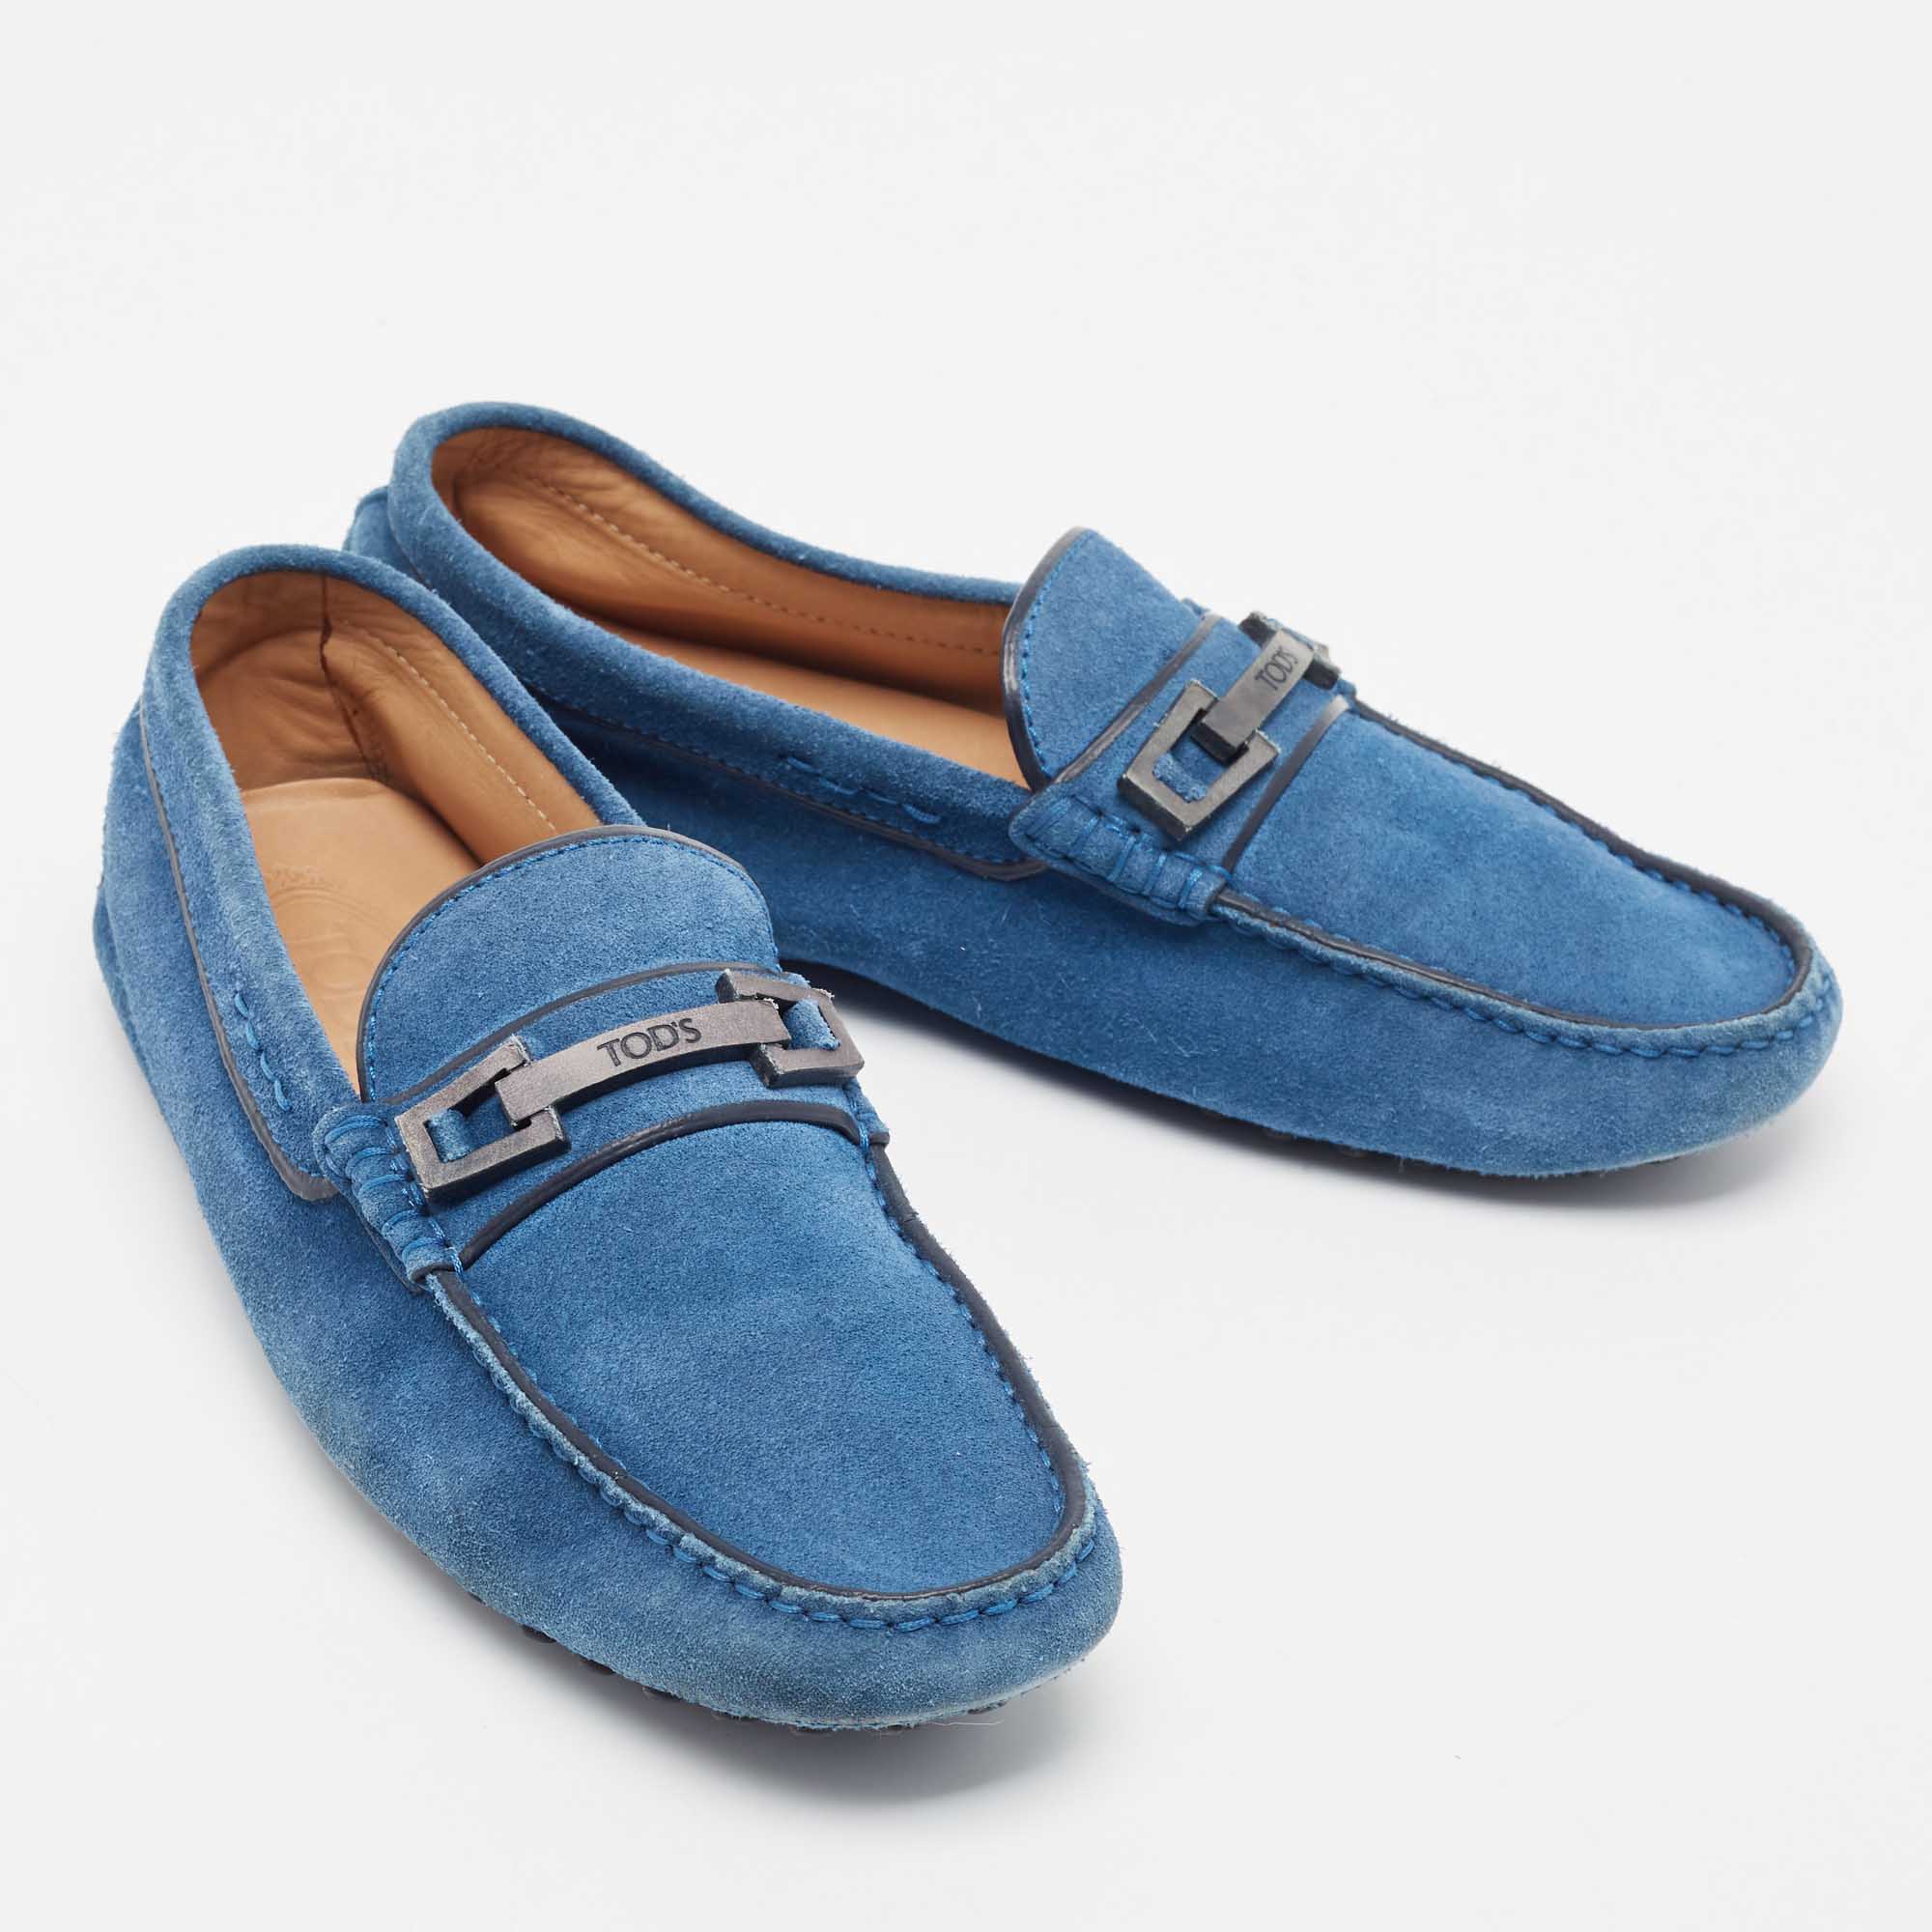 Tod's Blue Suede Buckle Slip On Loafers Size 40